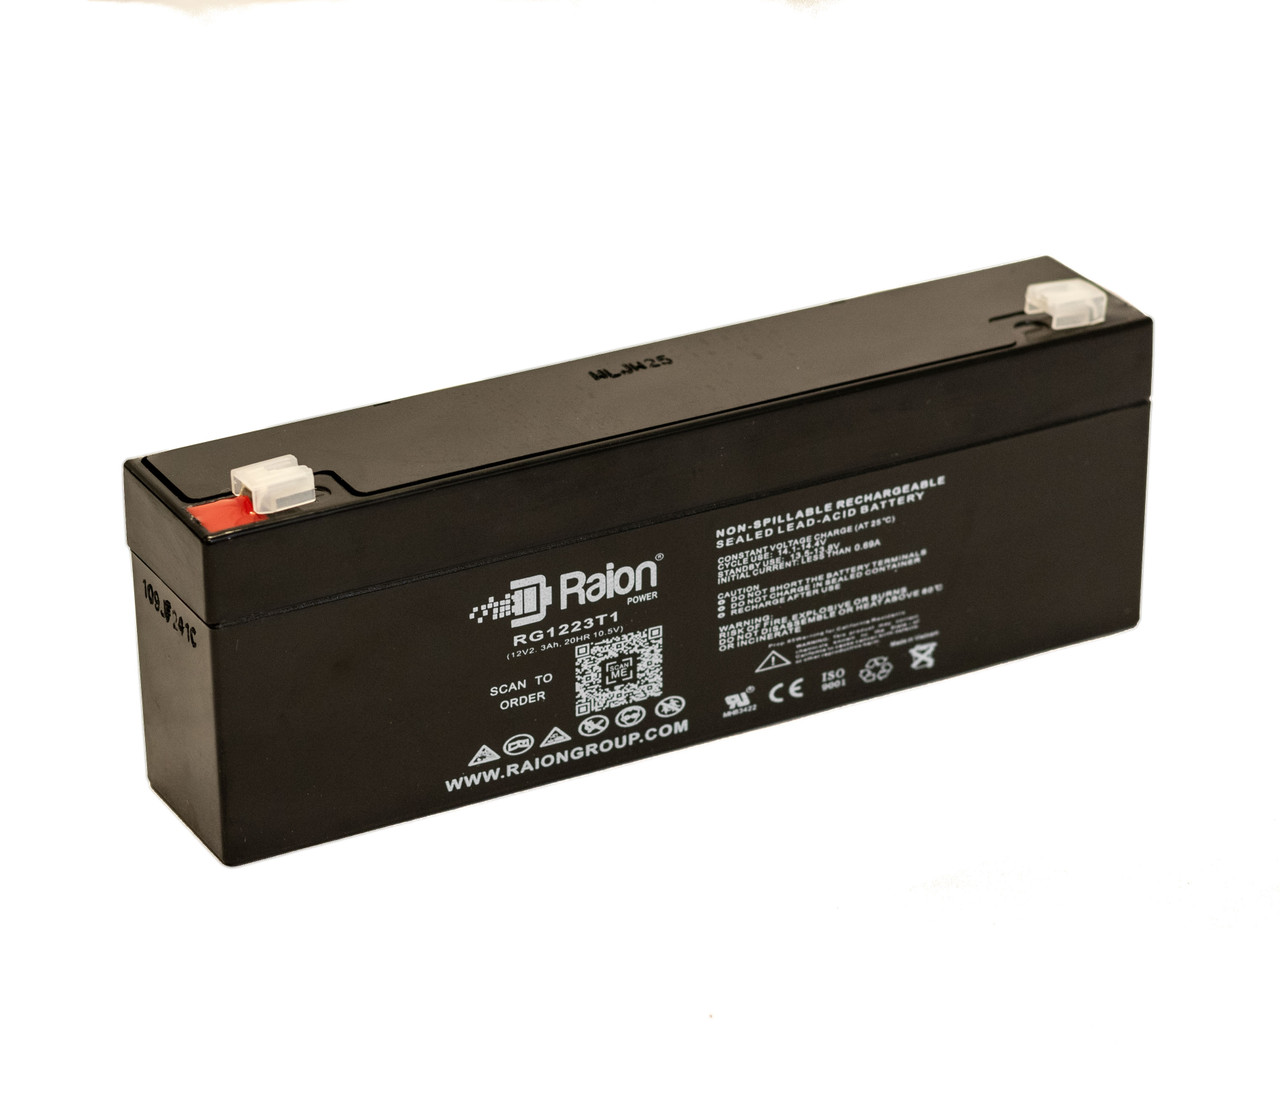 Raion Power RG1223T1 Replacement Battery for Datex-Ohmeda I-NO Vent